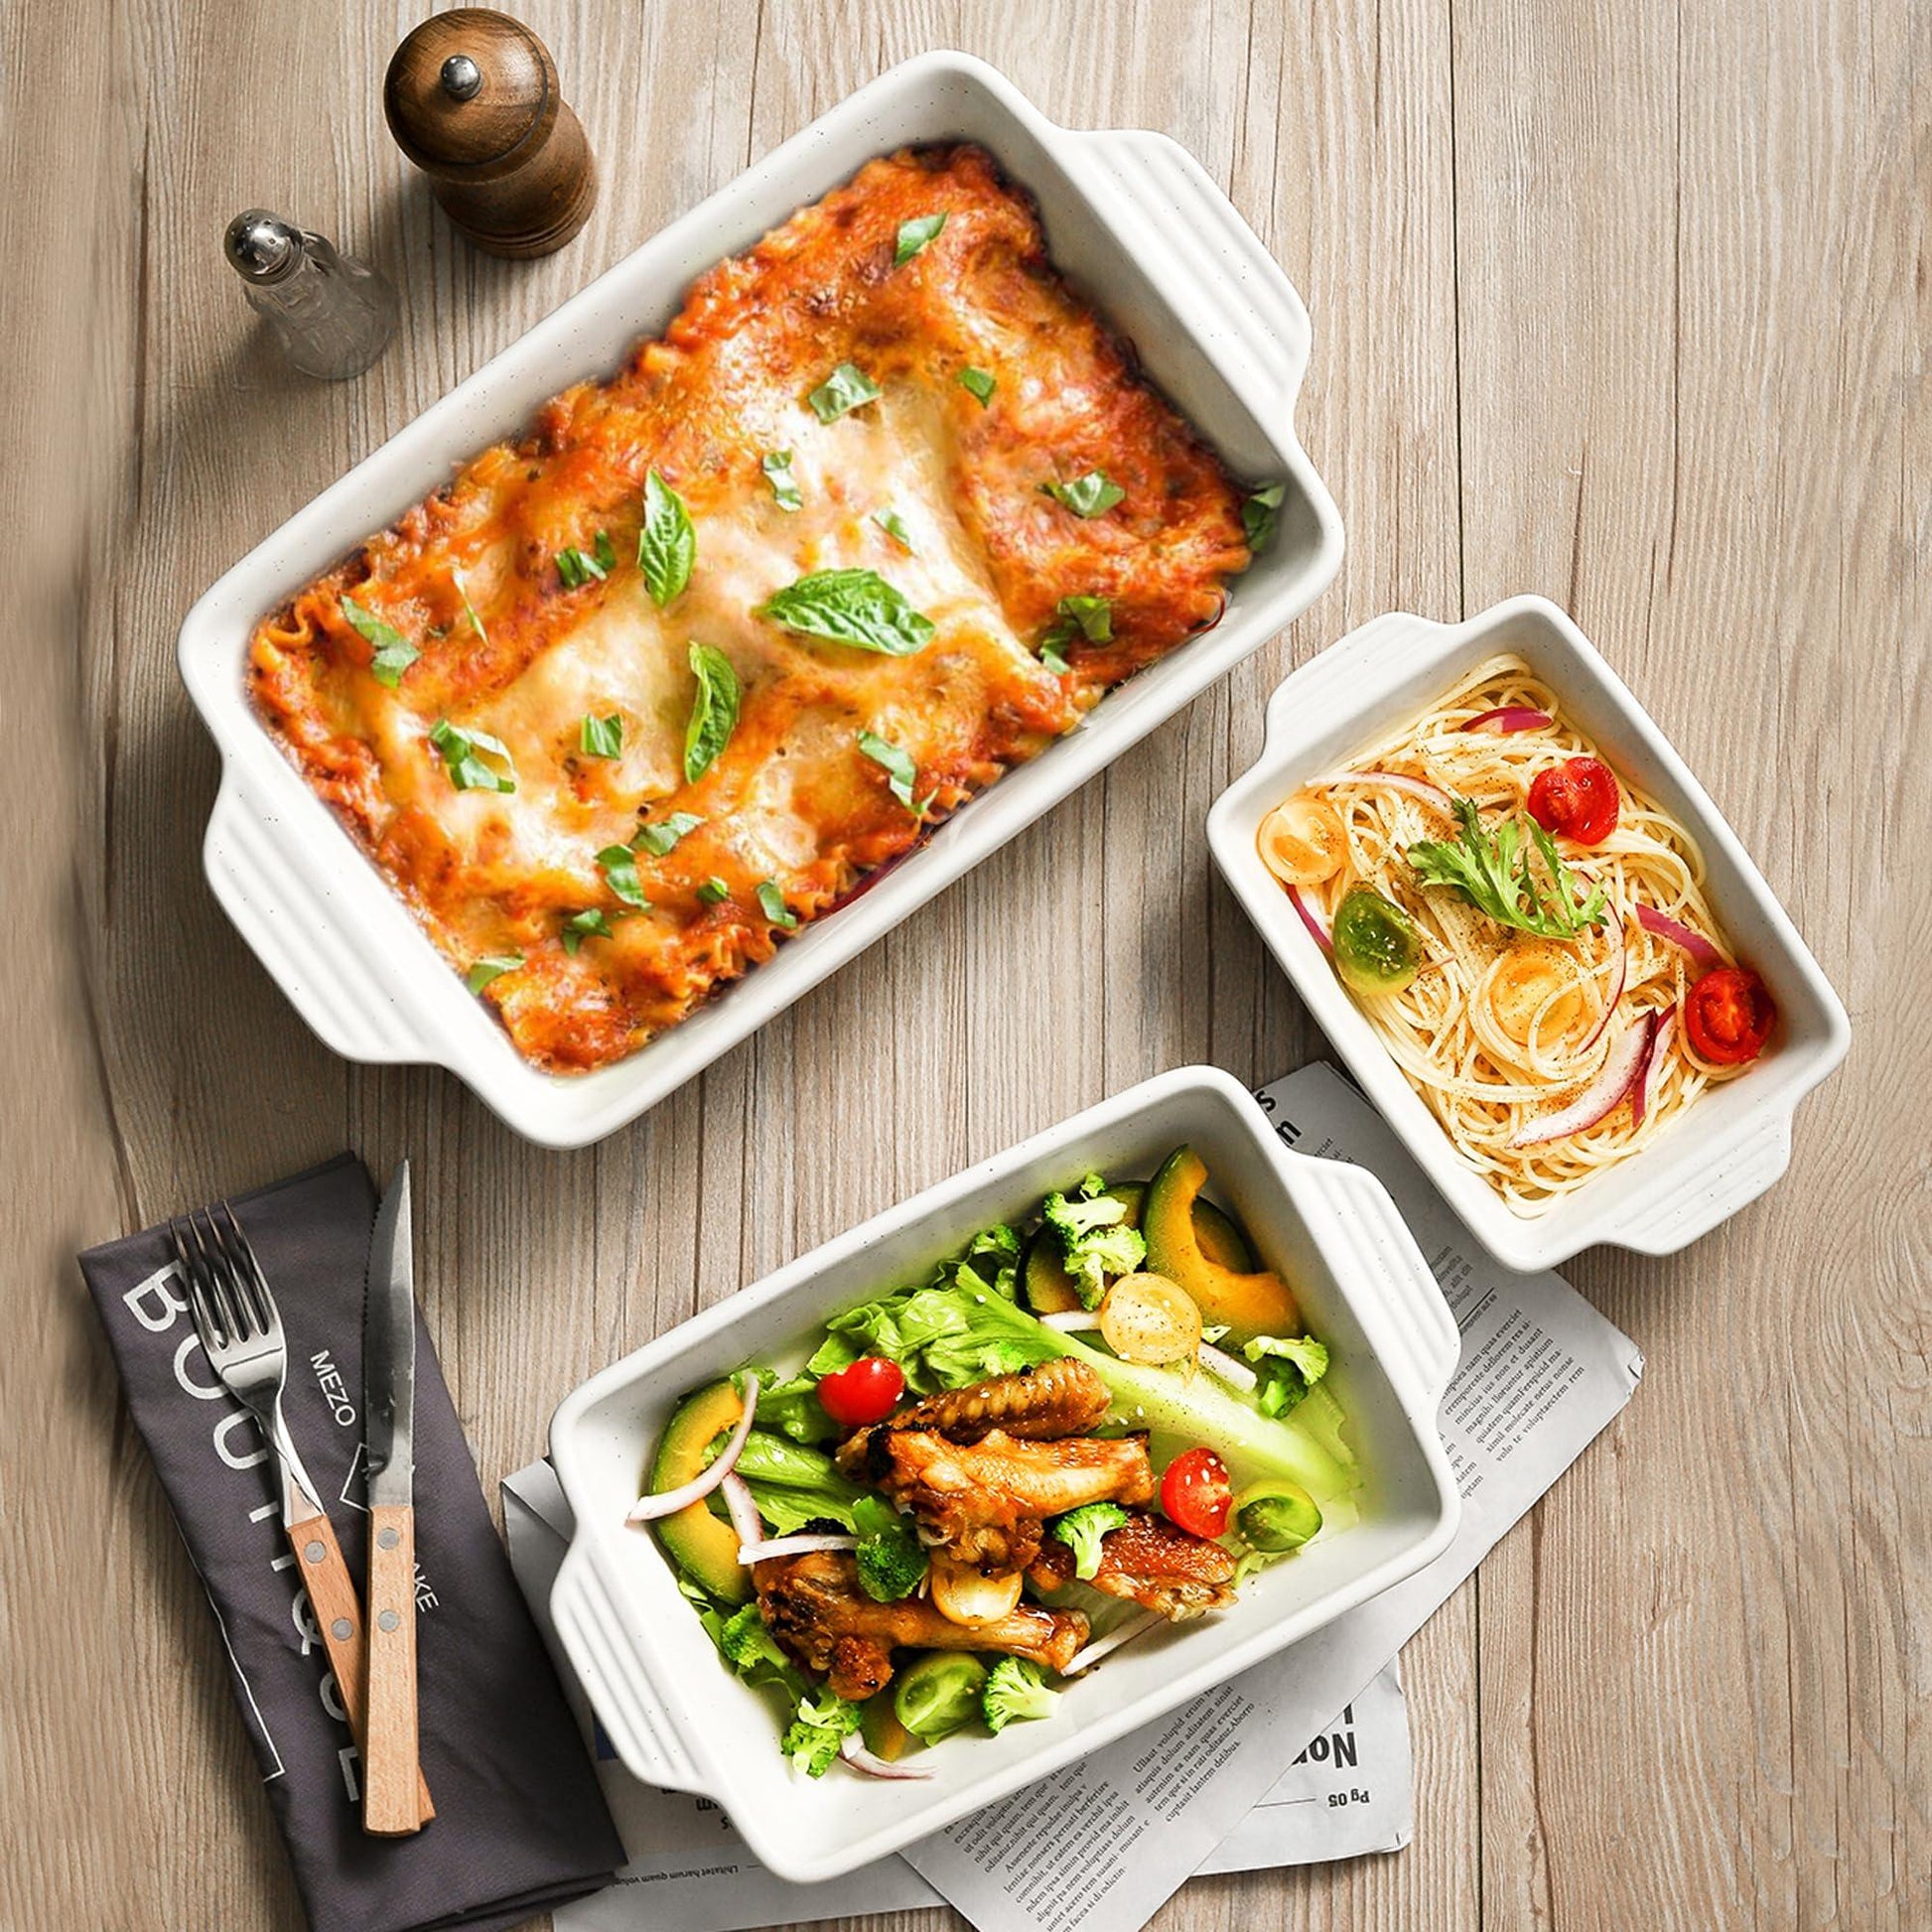 YMASINS Ceramic Baking Dish, Casserole Dishes for Oven, Extra Deep Lasagna Pans with Handles, Rectangular Bakeware Set of 3 from Oven to Table, Easy to Clean, 14.7 x 8.7 x 3 Inches, White - CookCave